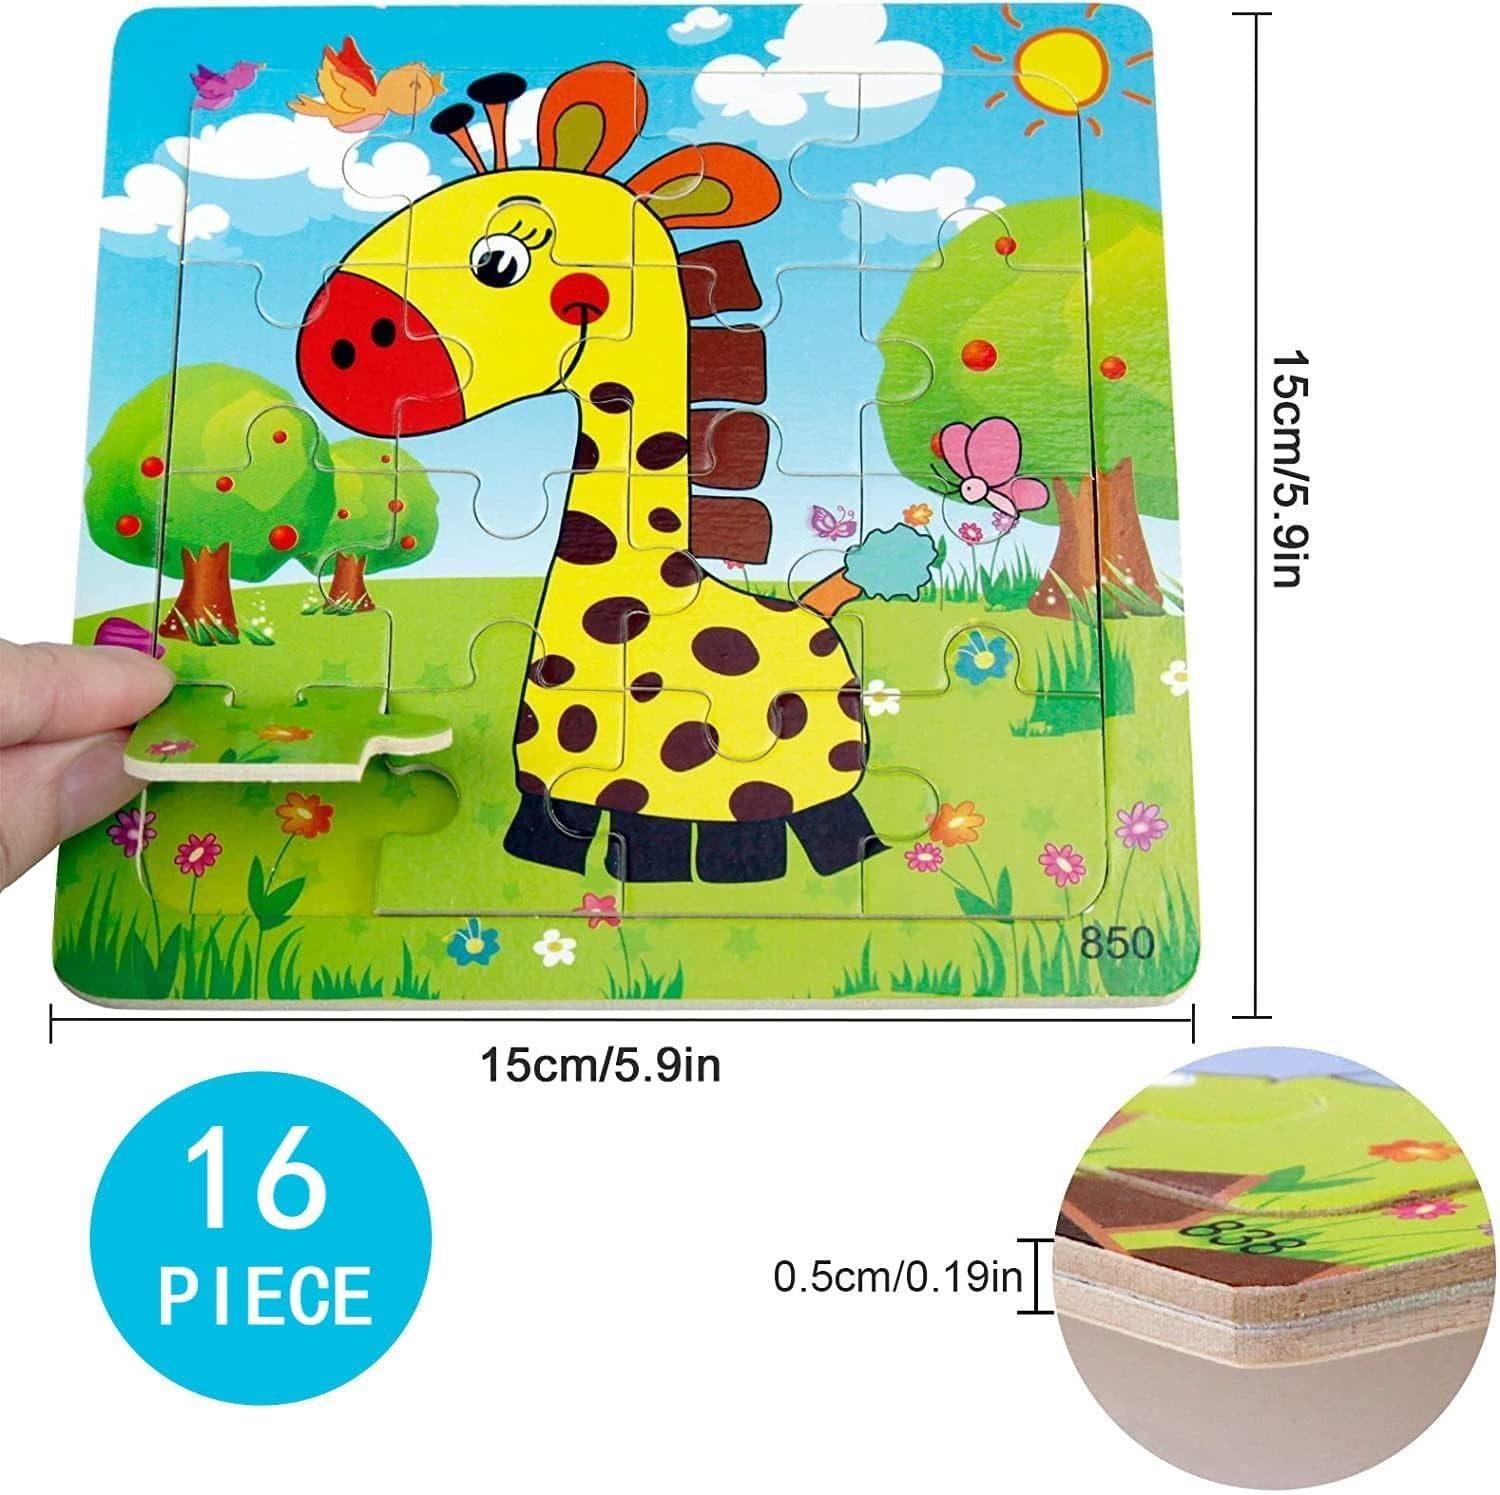 Wooden Jigsaw Pattern Puzzle with Guide - 16 Pieces